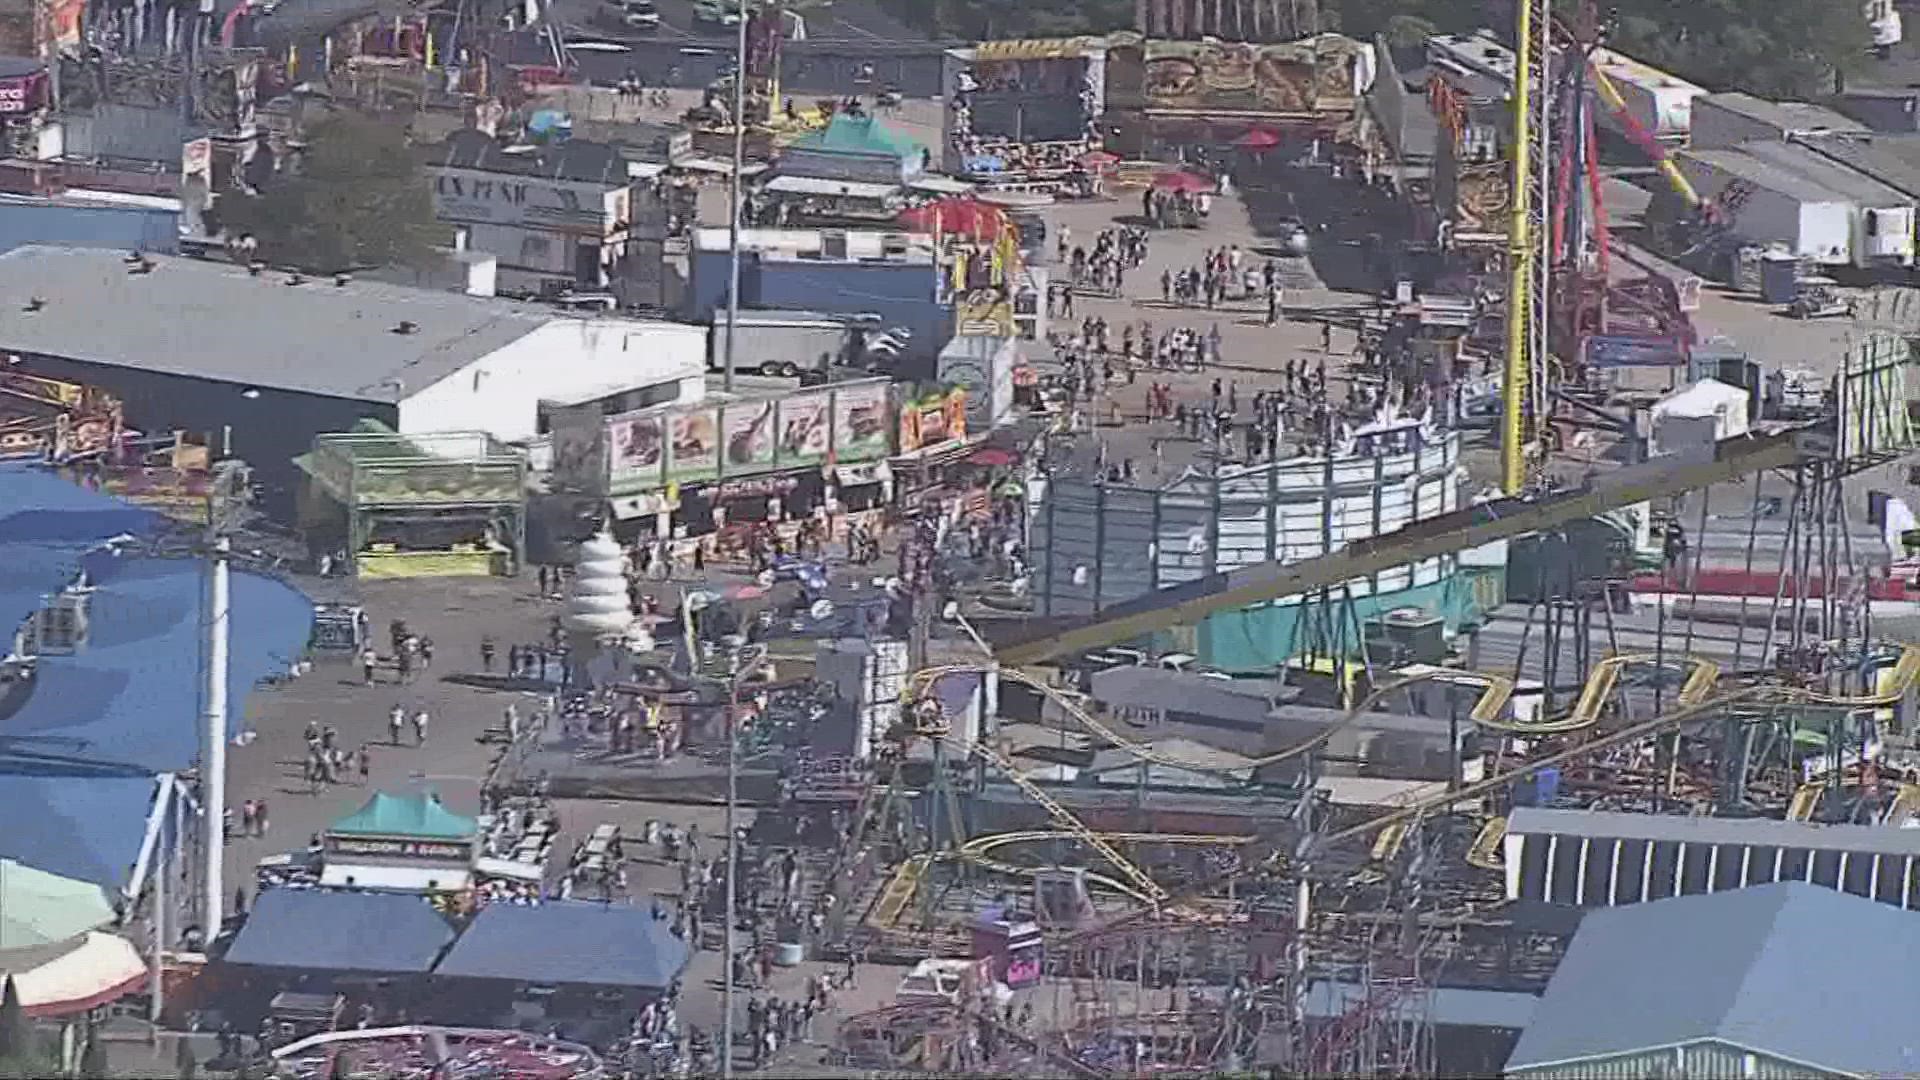 The fair had 2.5 million people attend in 2022.